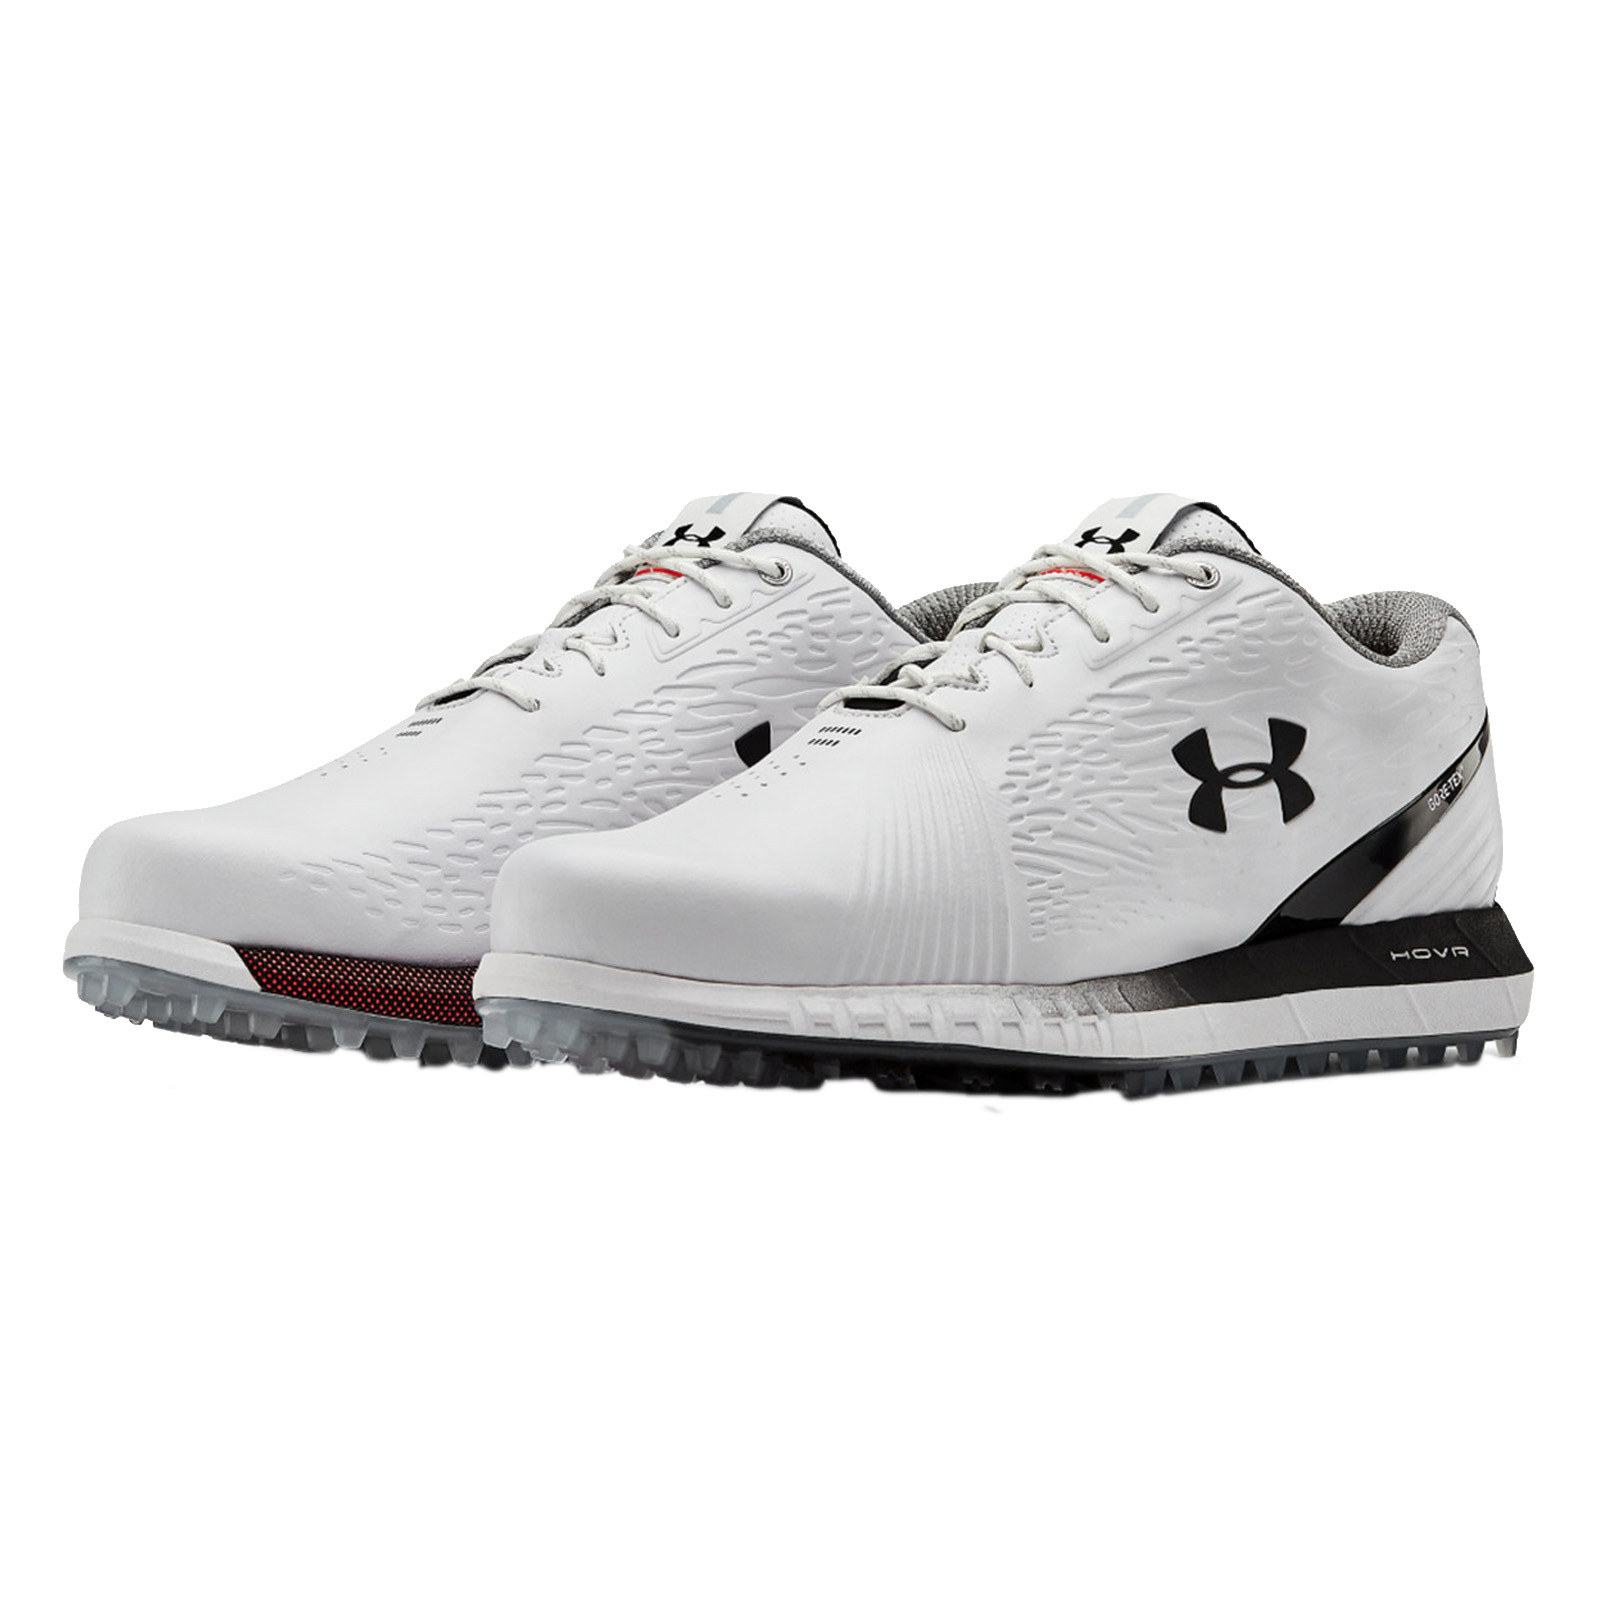 Under Armour Mens HOVR Show SL Gore-Tex Waterproof Golf Shoes ...